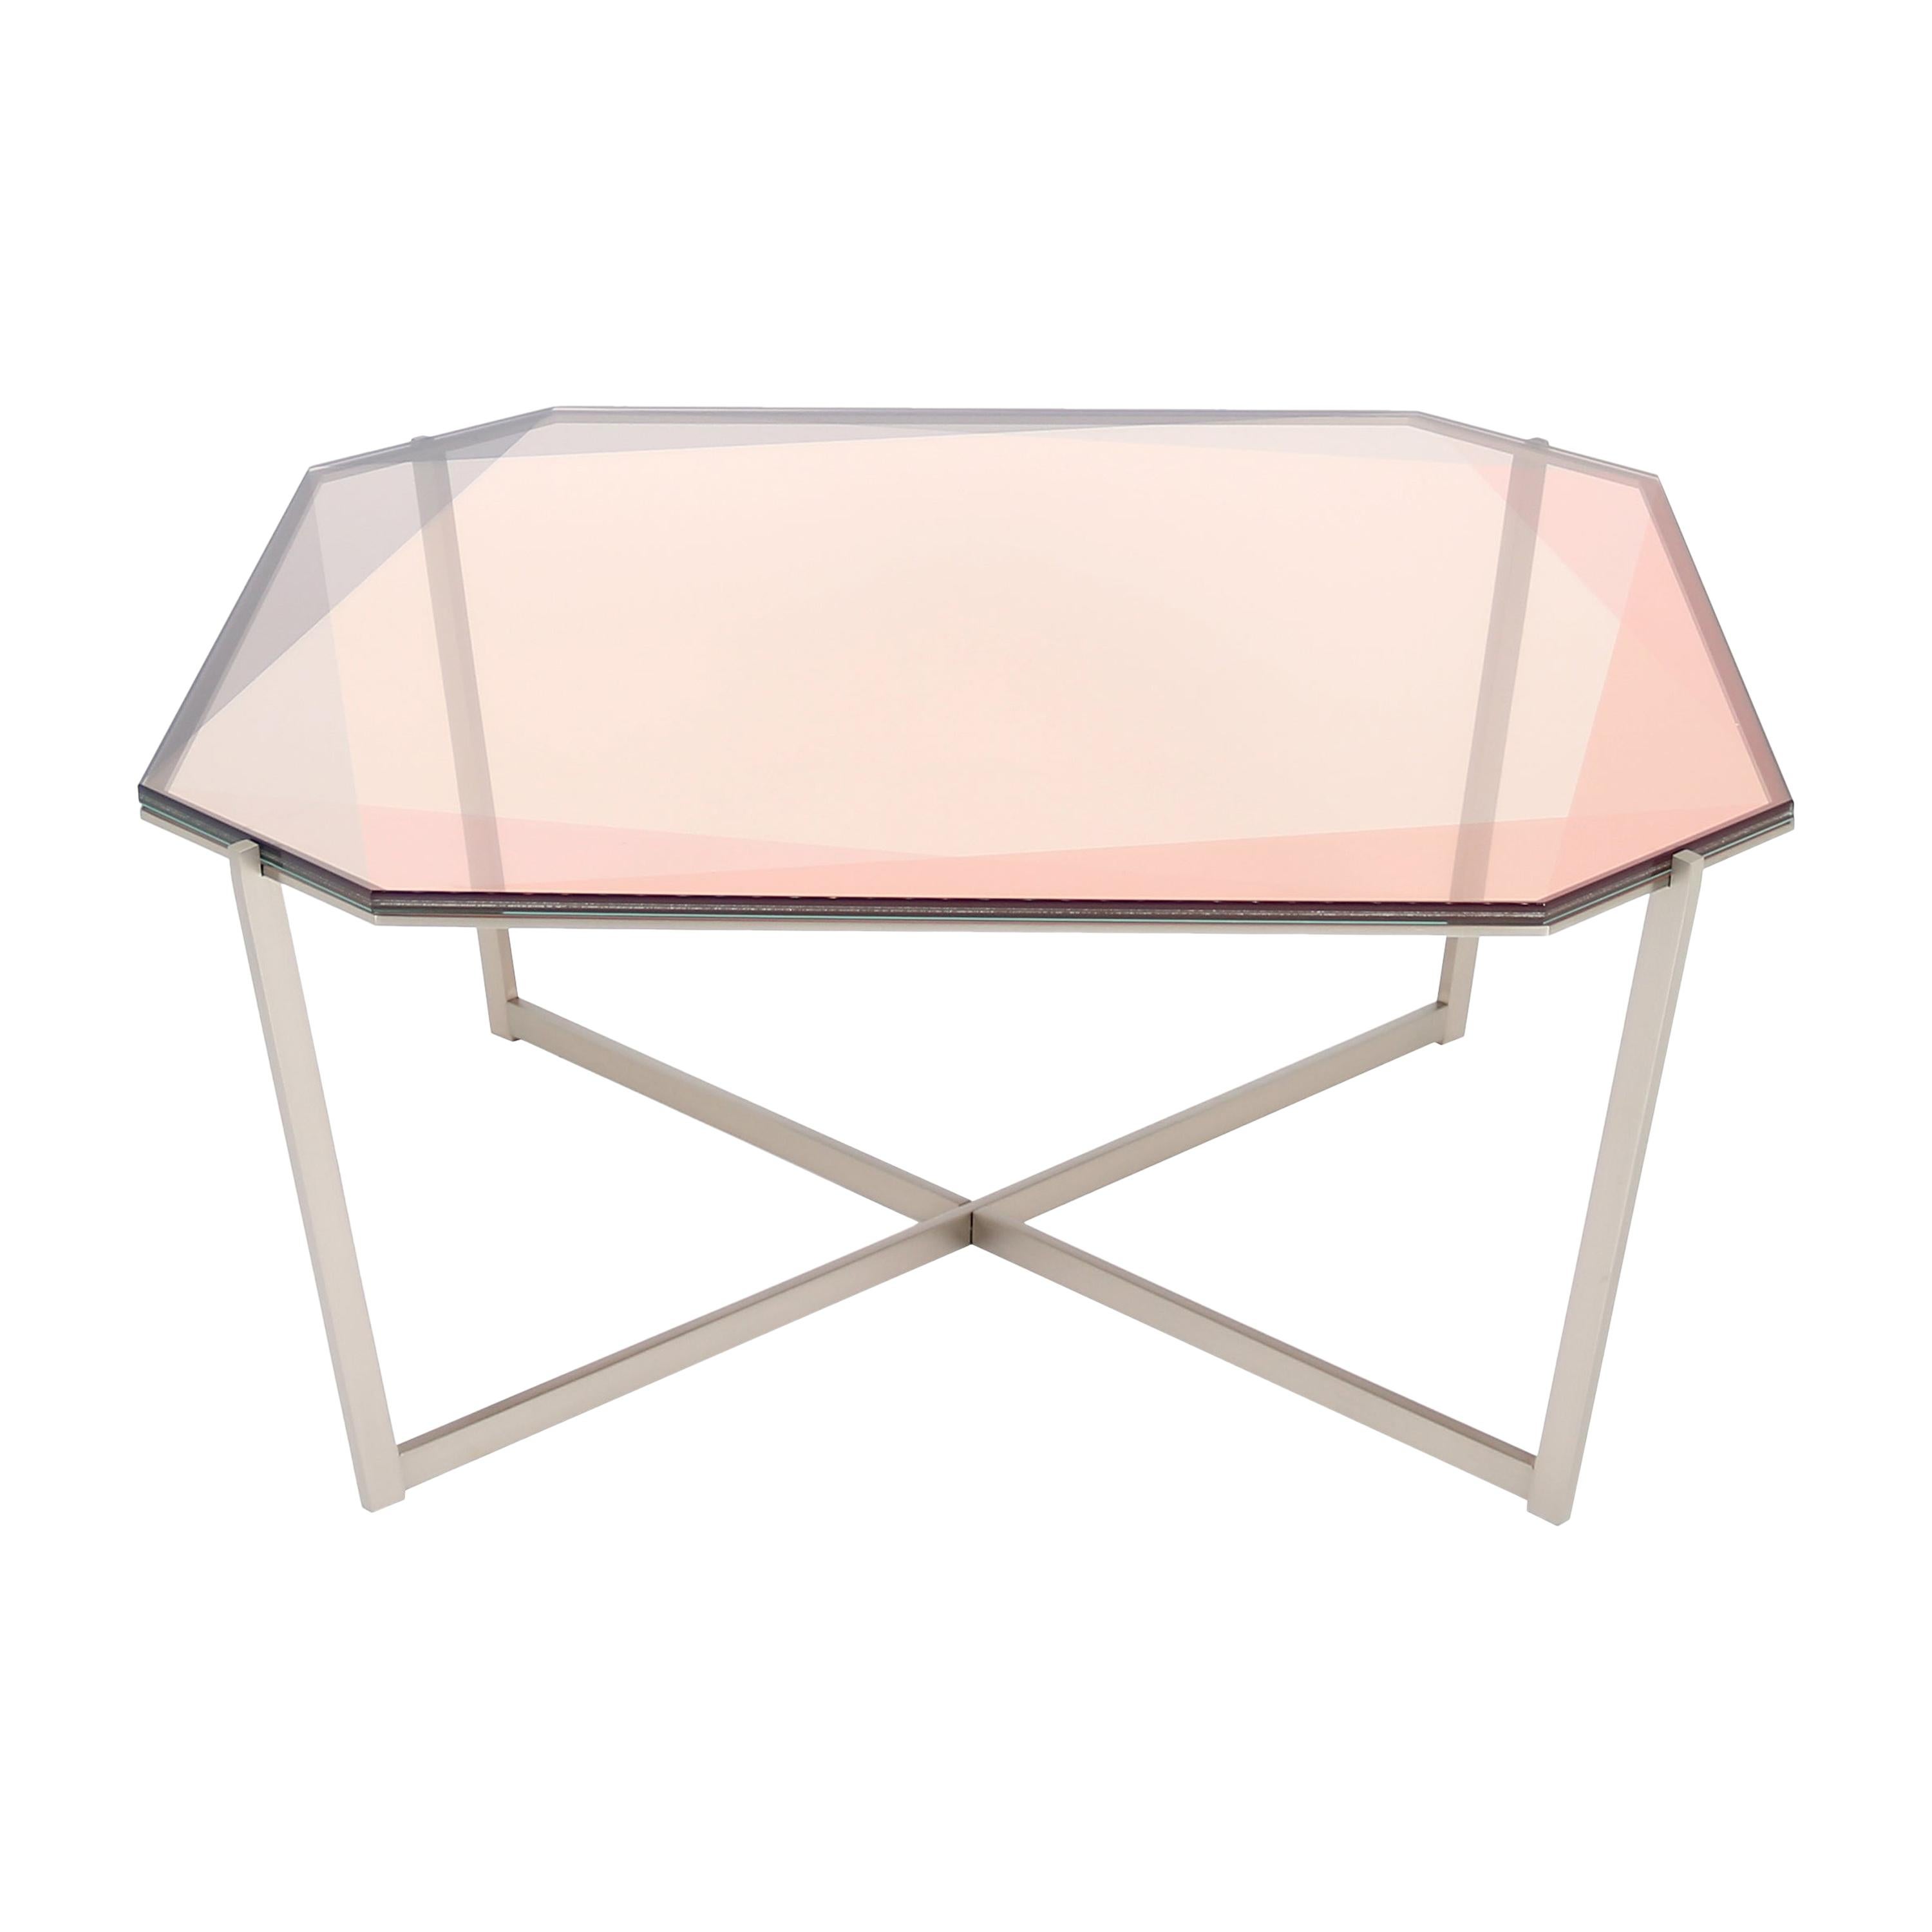 Gem Square Coffee Table-Blush Glass with Stainless Steel Base by Debra Folz